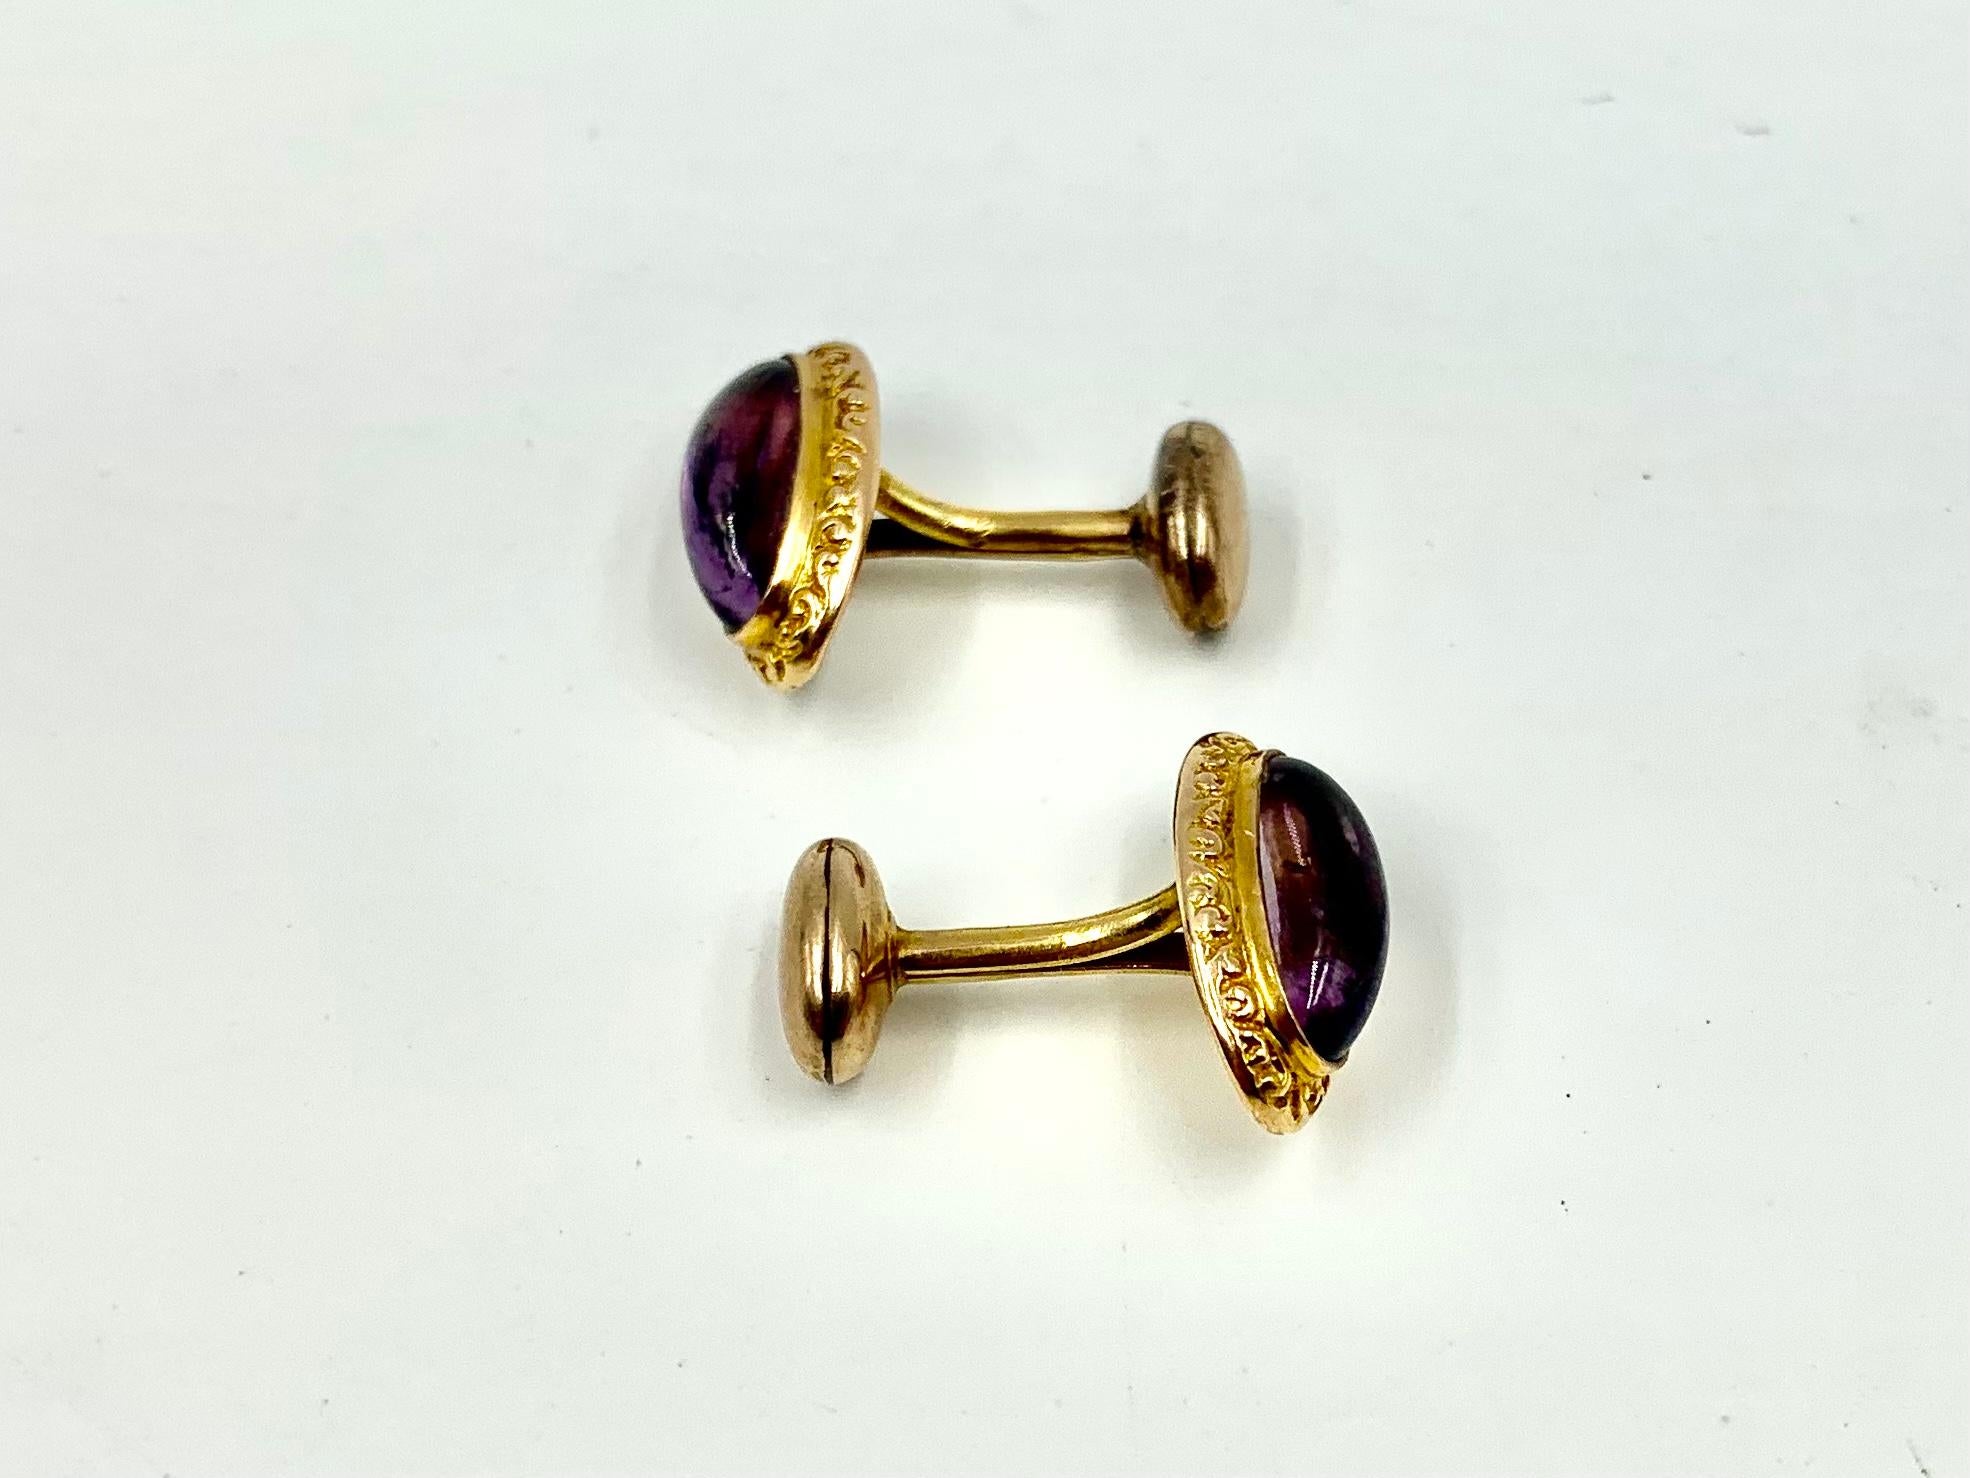 Antique Victorian 14K Yellow Gold Repousse Scroll Cabochon Amethyst Cufflinks 1